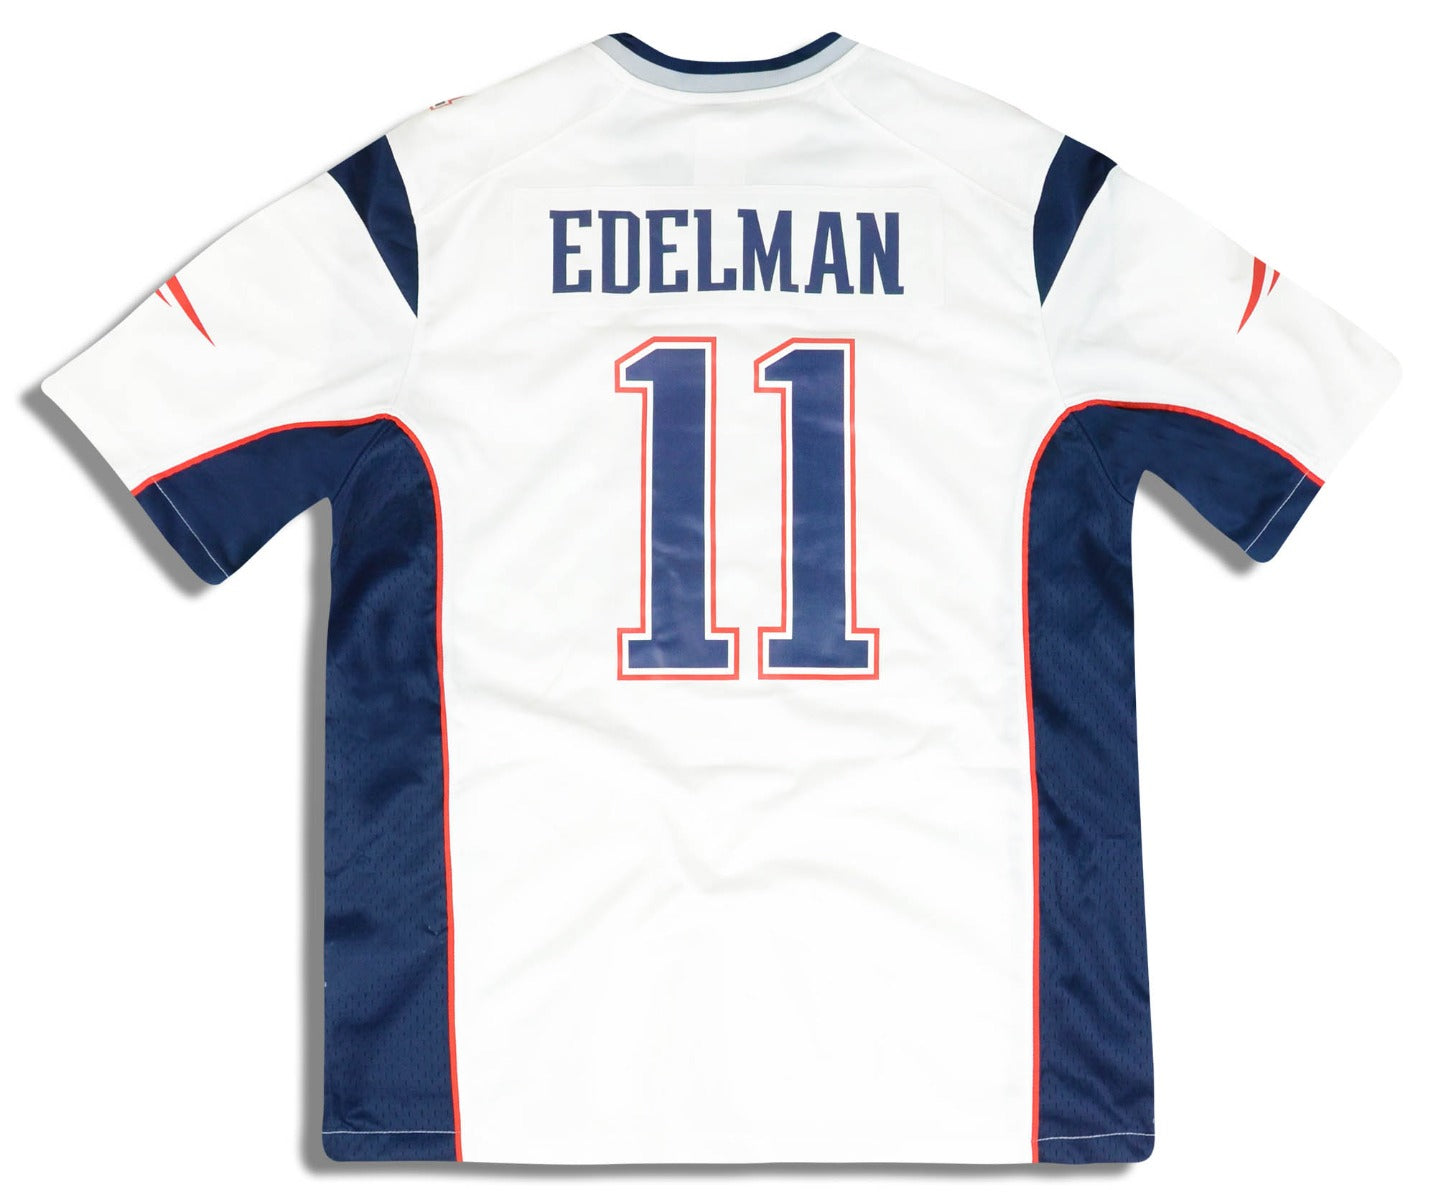 2018-19 NEW ENGLAND PATRIOTS EDELMAN #11 NIKE GAME JERSEY (AWAY) L - *AS NEW*